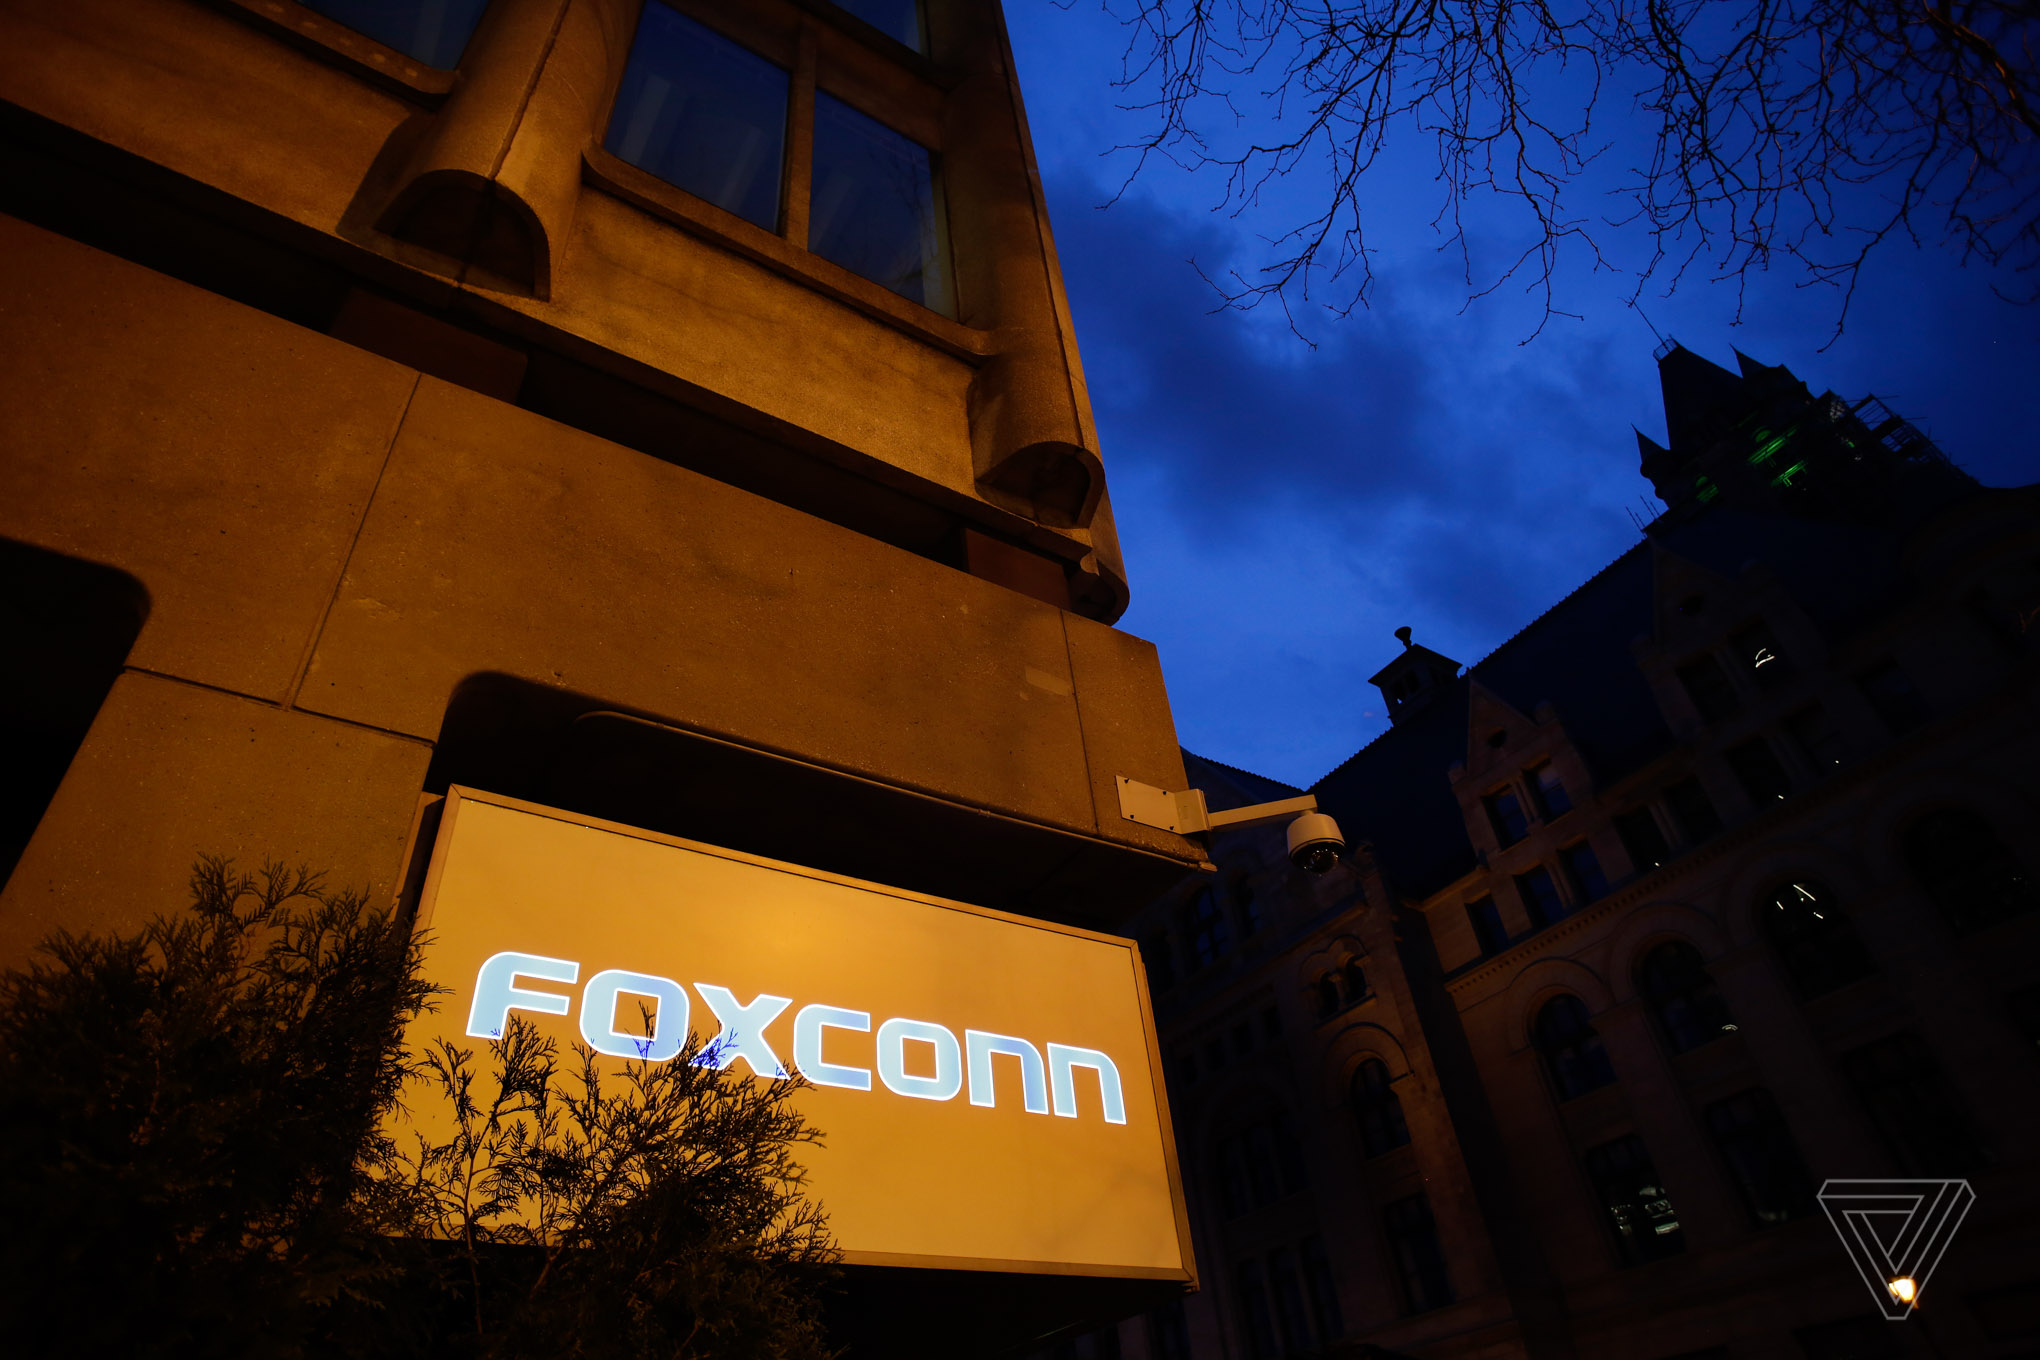 The Foxconn name displayed outside of an office building on Wednesday, May 8 2019 in Milwaukee, Wisconsin. Foxconn is a electronics contract manufacturing company, which is constructing a plant in south eastern Wisconsin creating thousands of jobs.